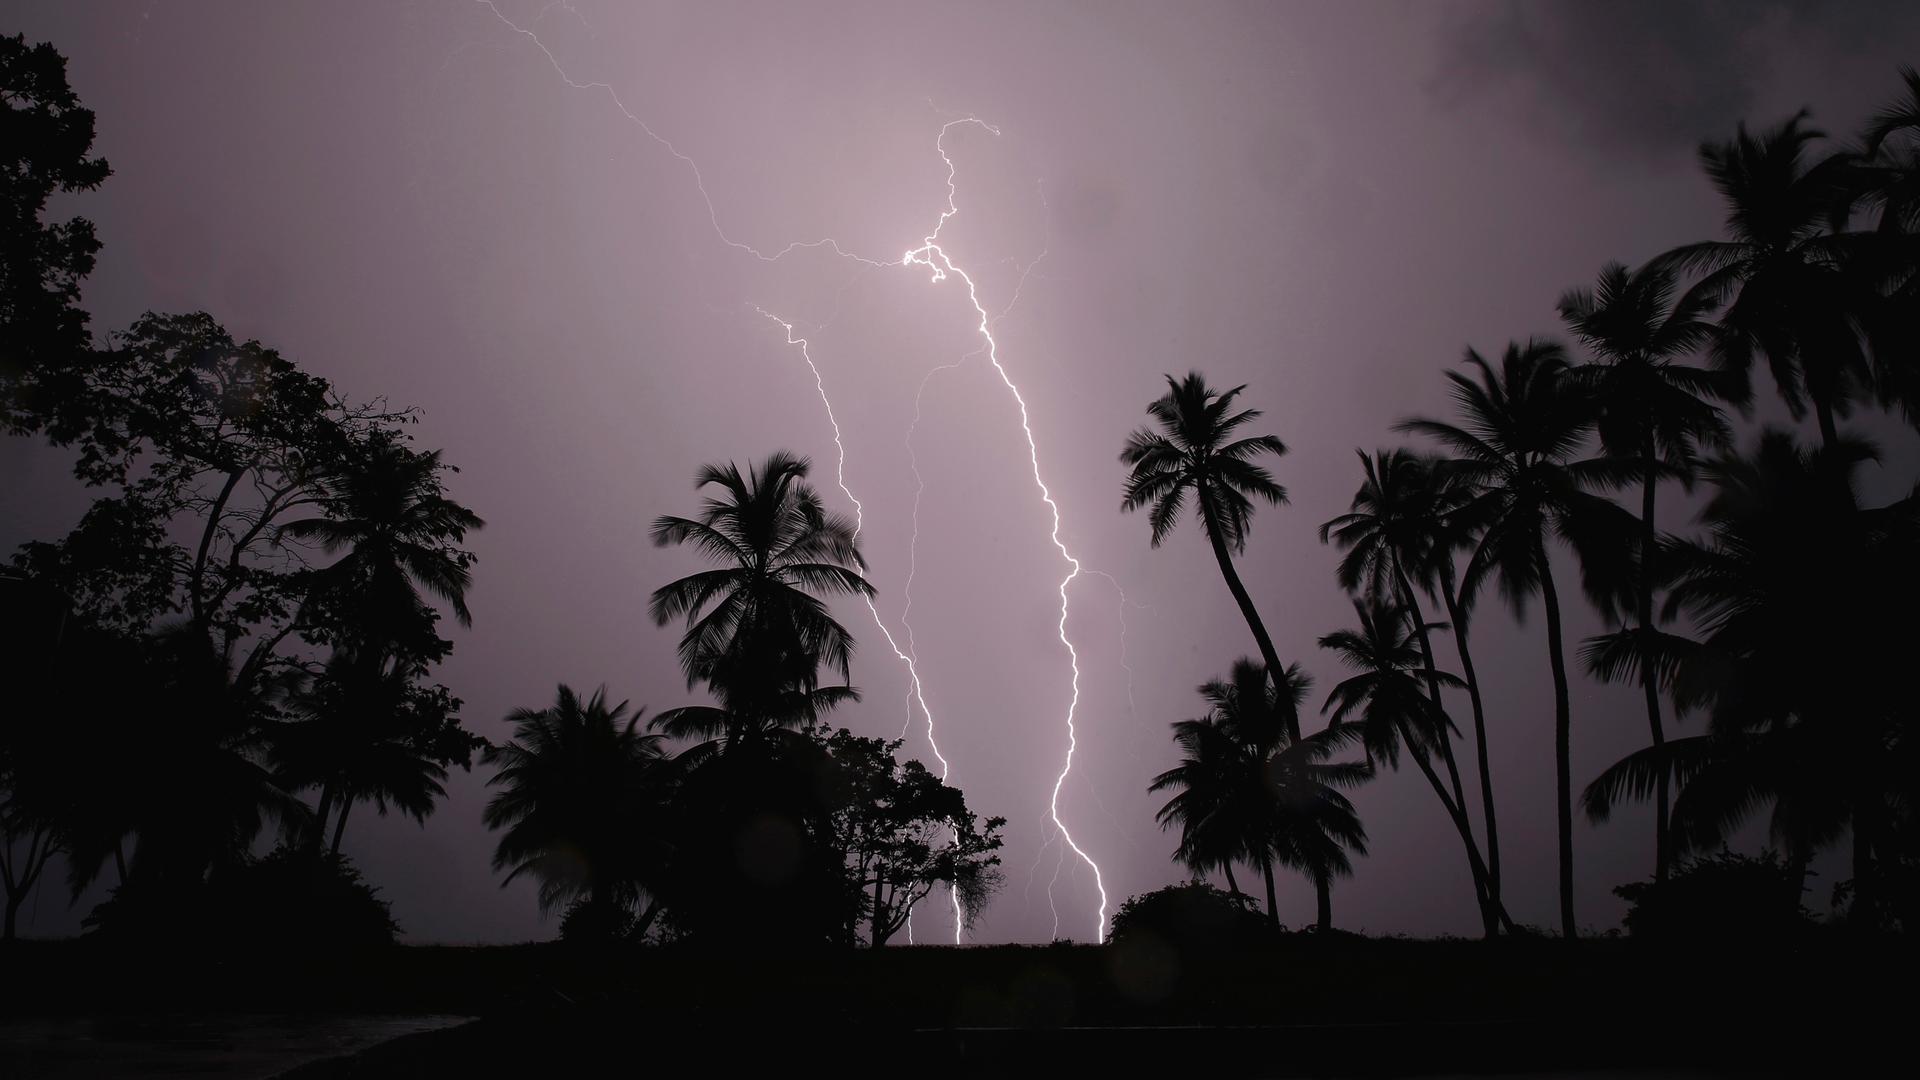 Lightning strikes over Lake Maracaibo in the village of Ologa, where the Catatumbo River feeds into the lake, in the western state of Zulia October 23, 2014.